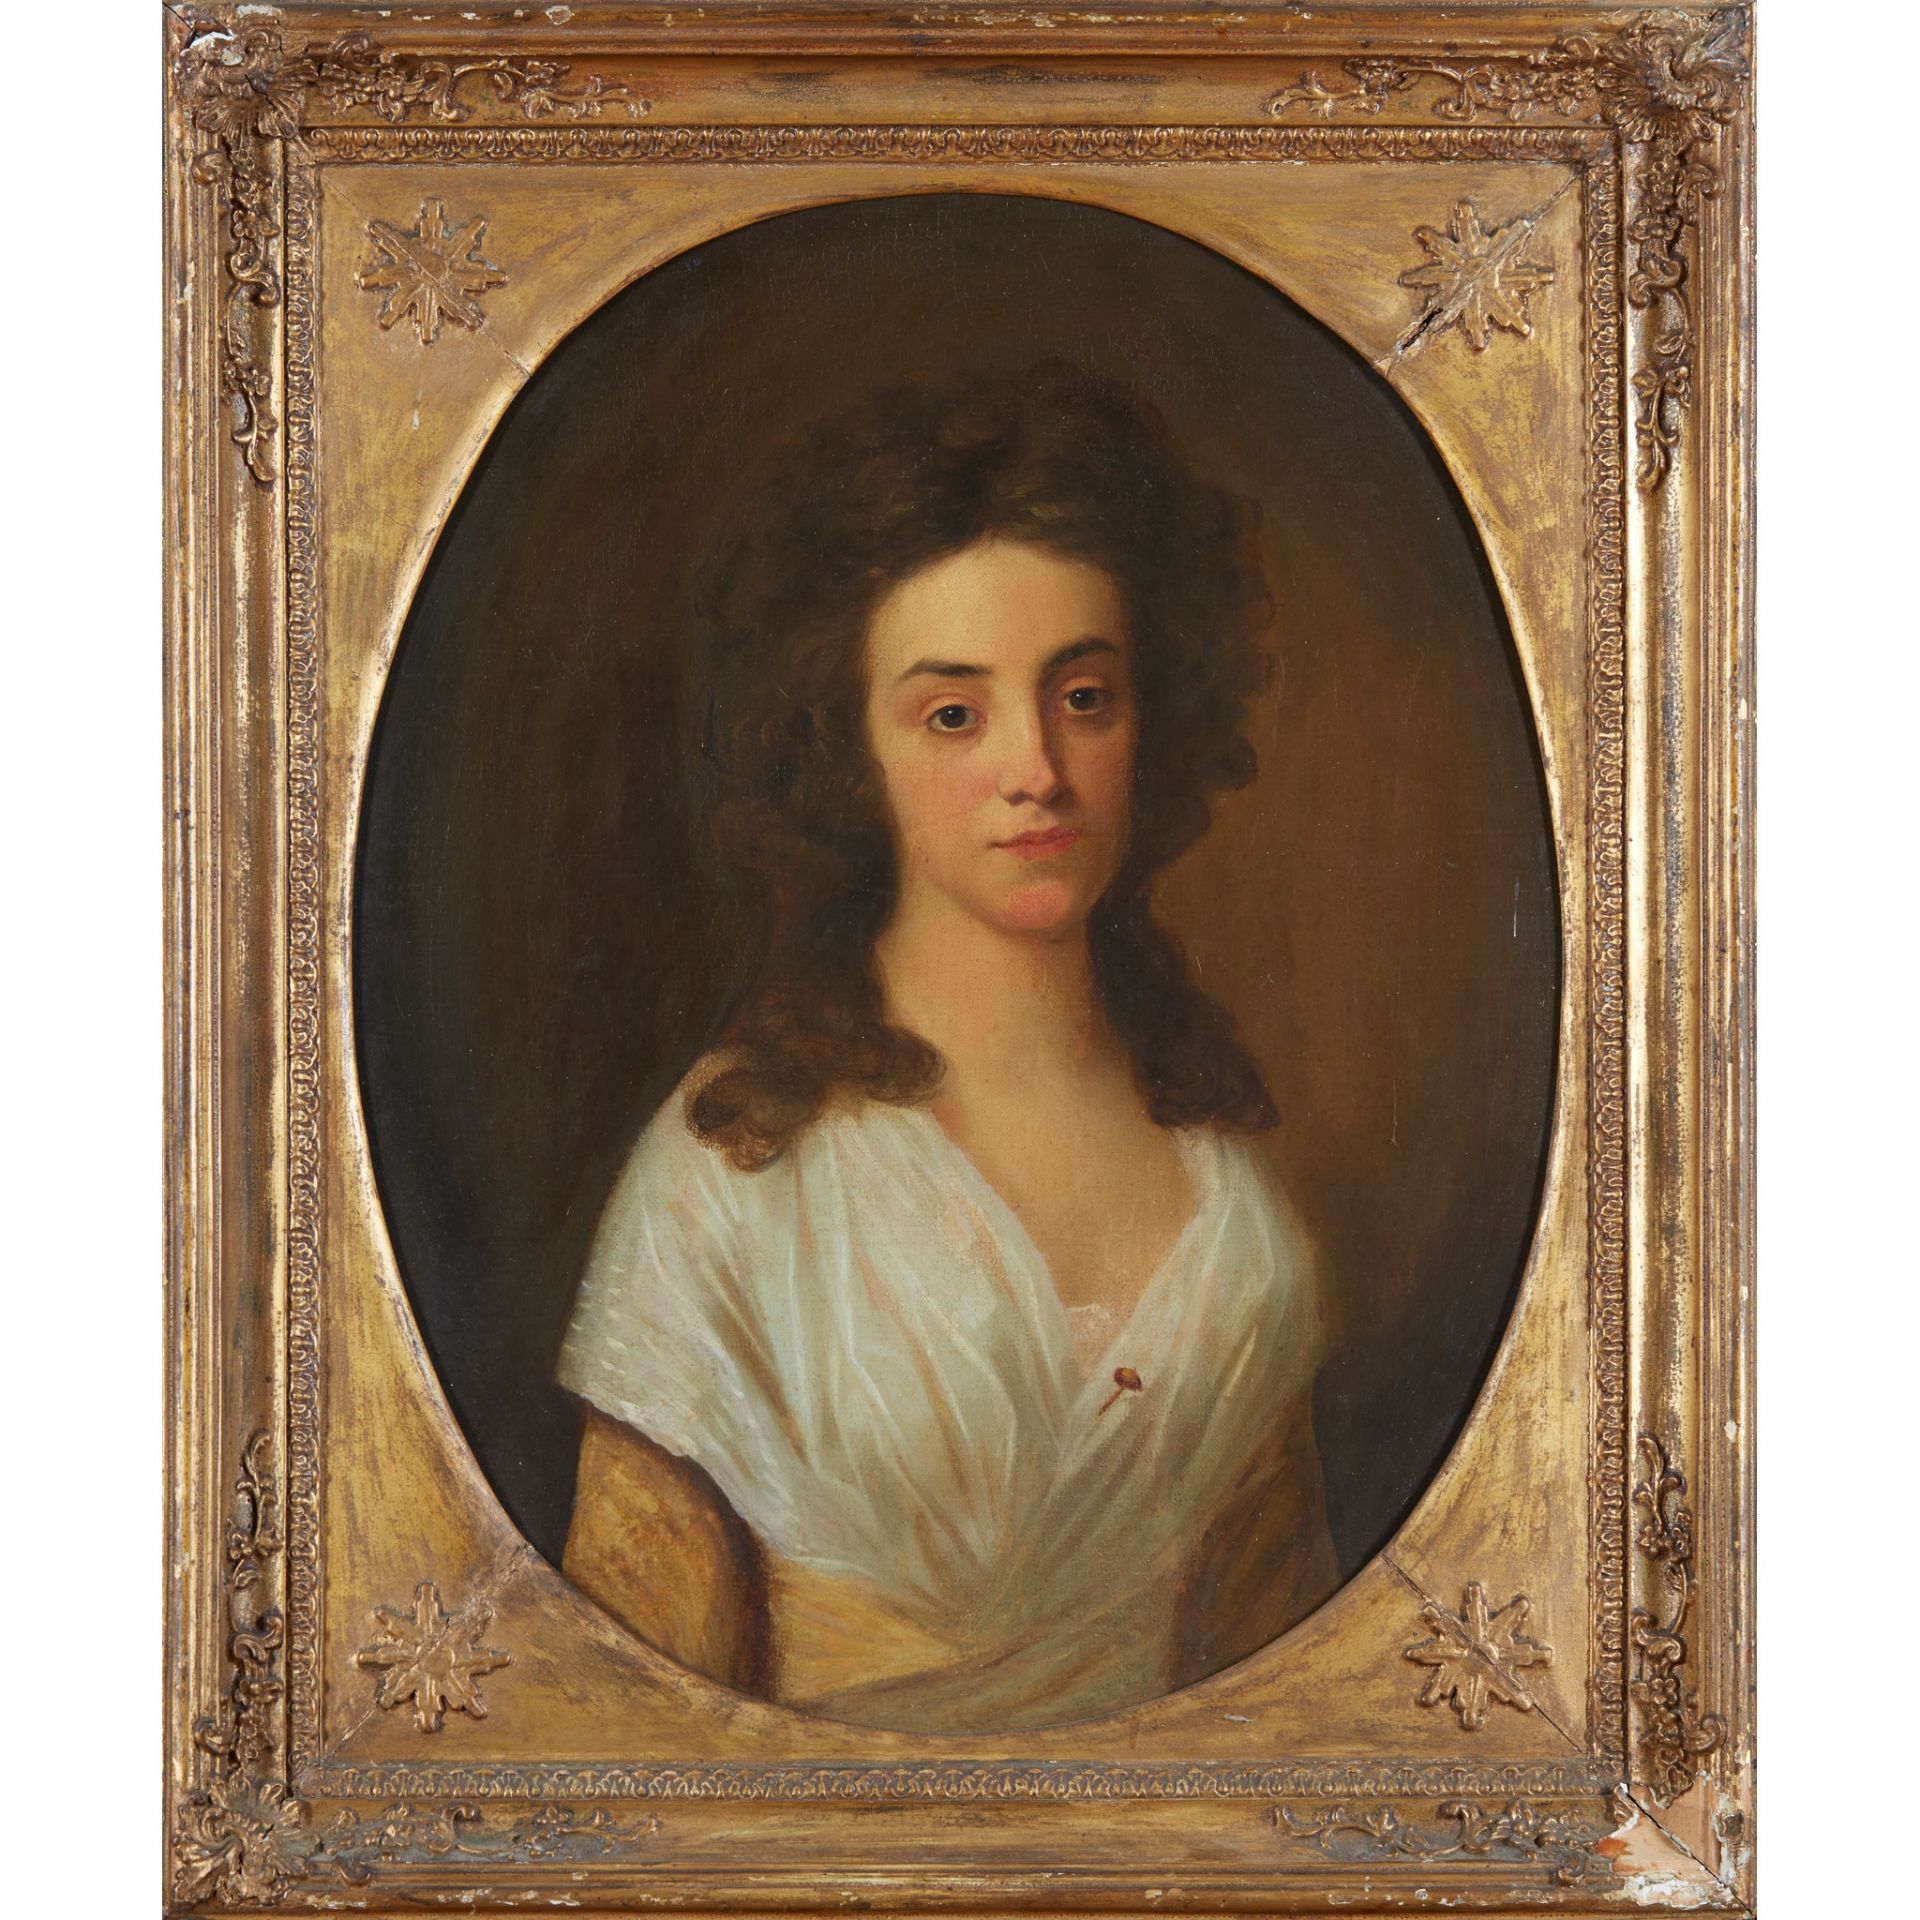 18TH CENTURY ENGLISH SCHOOL HALF LENGTH PORTRAIT OF A YOUNG WOMAN IN YELLOW DRESS WITH WHITE SHAWL - Image 2 of 2